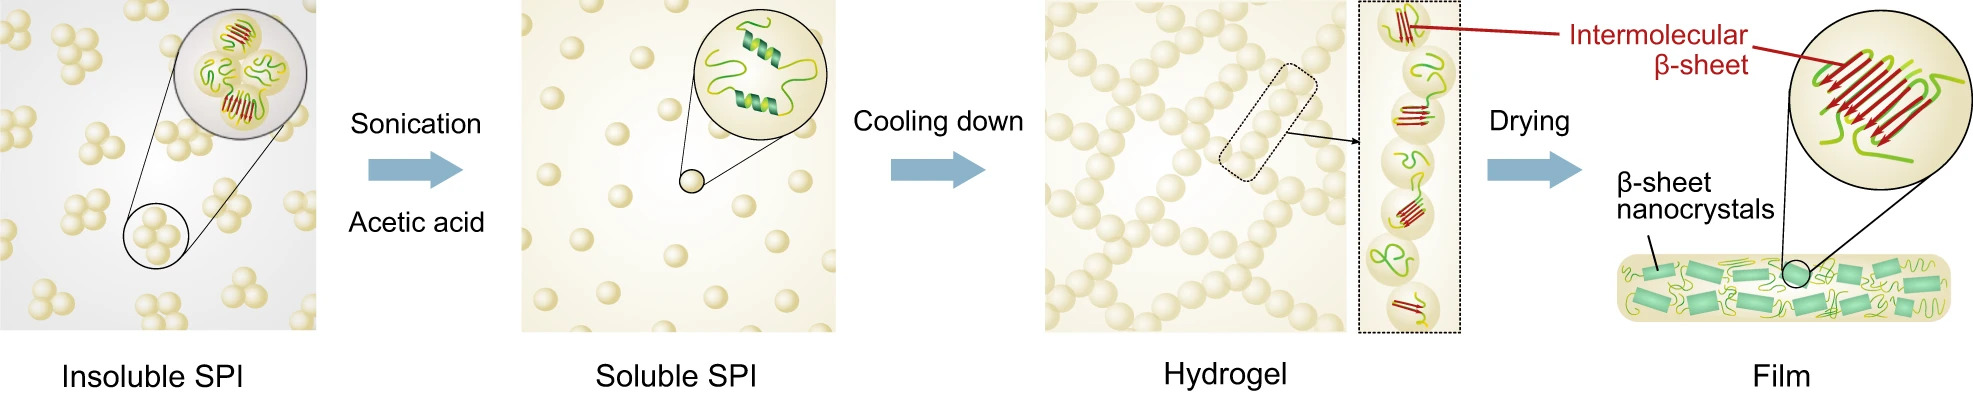 Through the ultrasonication treatment in acetic acid solution, the initially insoluble aggregates are solubilised and unfolded, making them avaialble to form new intermolecular interactions. Upon cooling down, the new intermolecular β-sheets structures are formed. The removal of solvent results in the formation of β-sheet nanocrystals within the film.